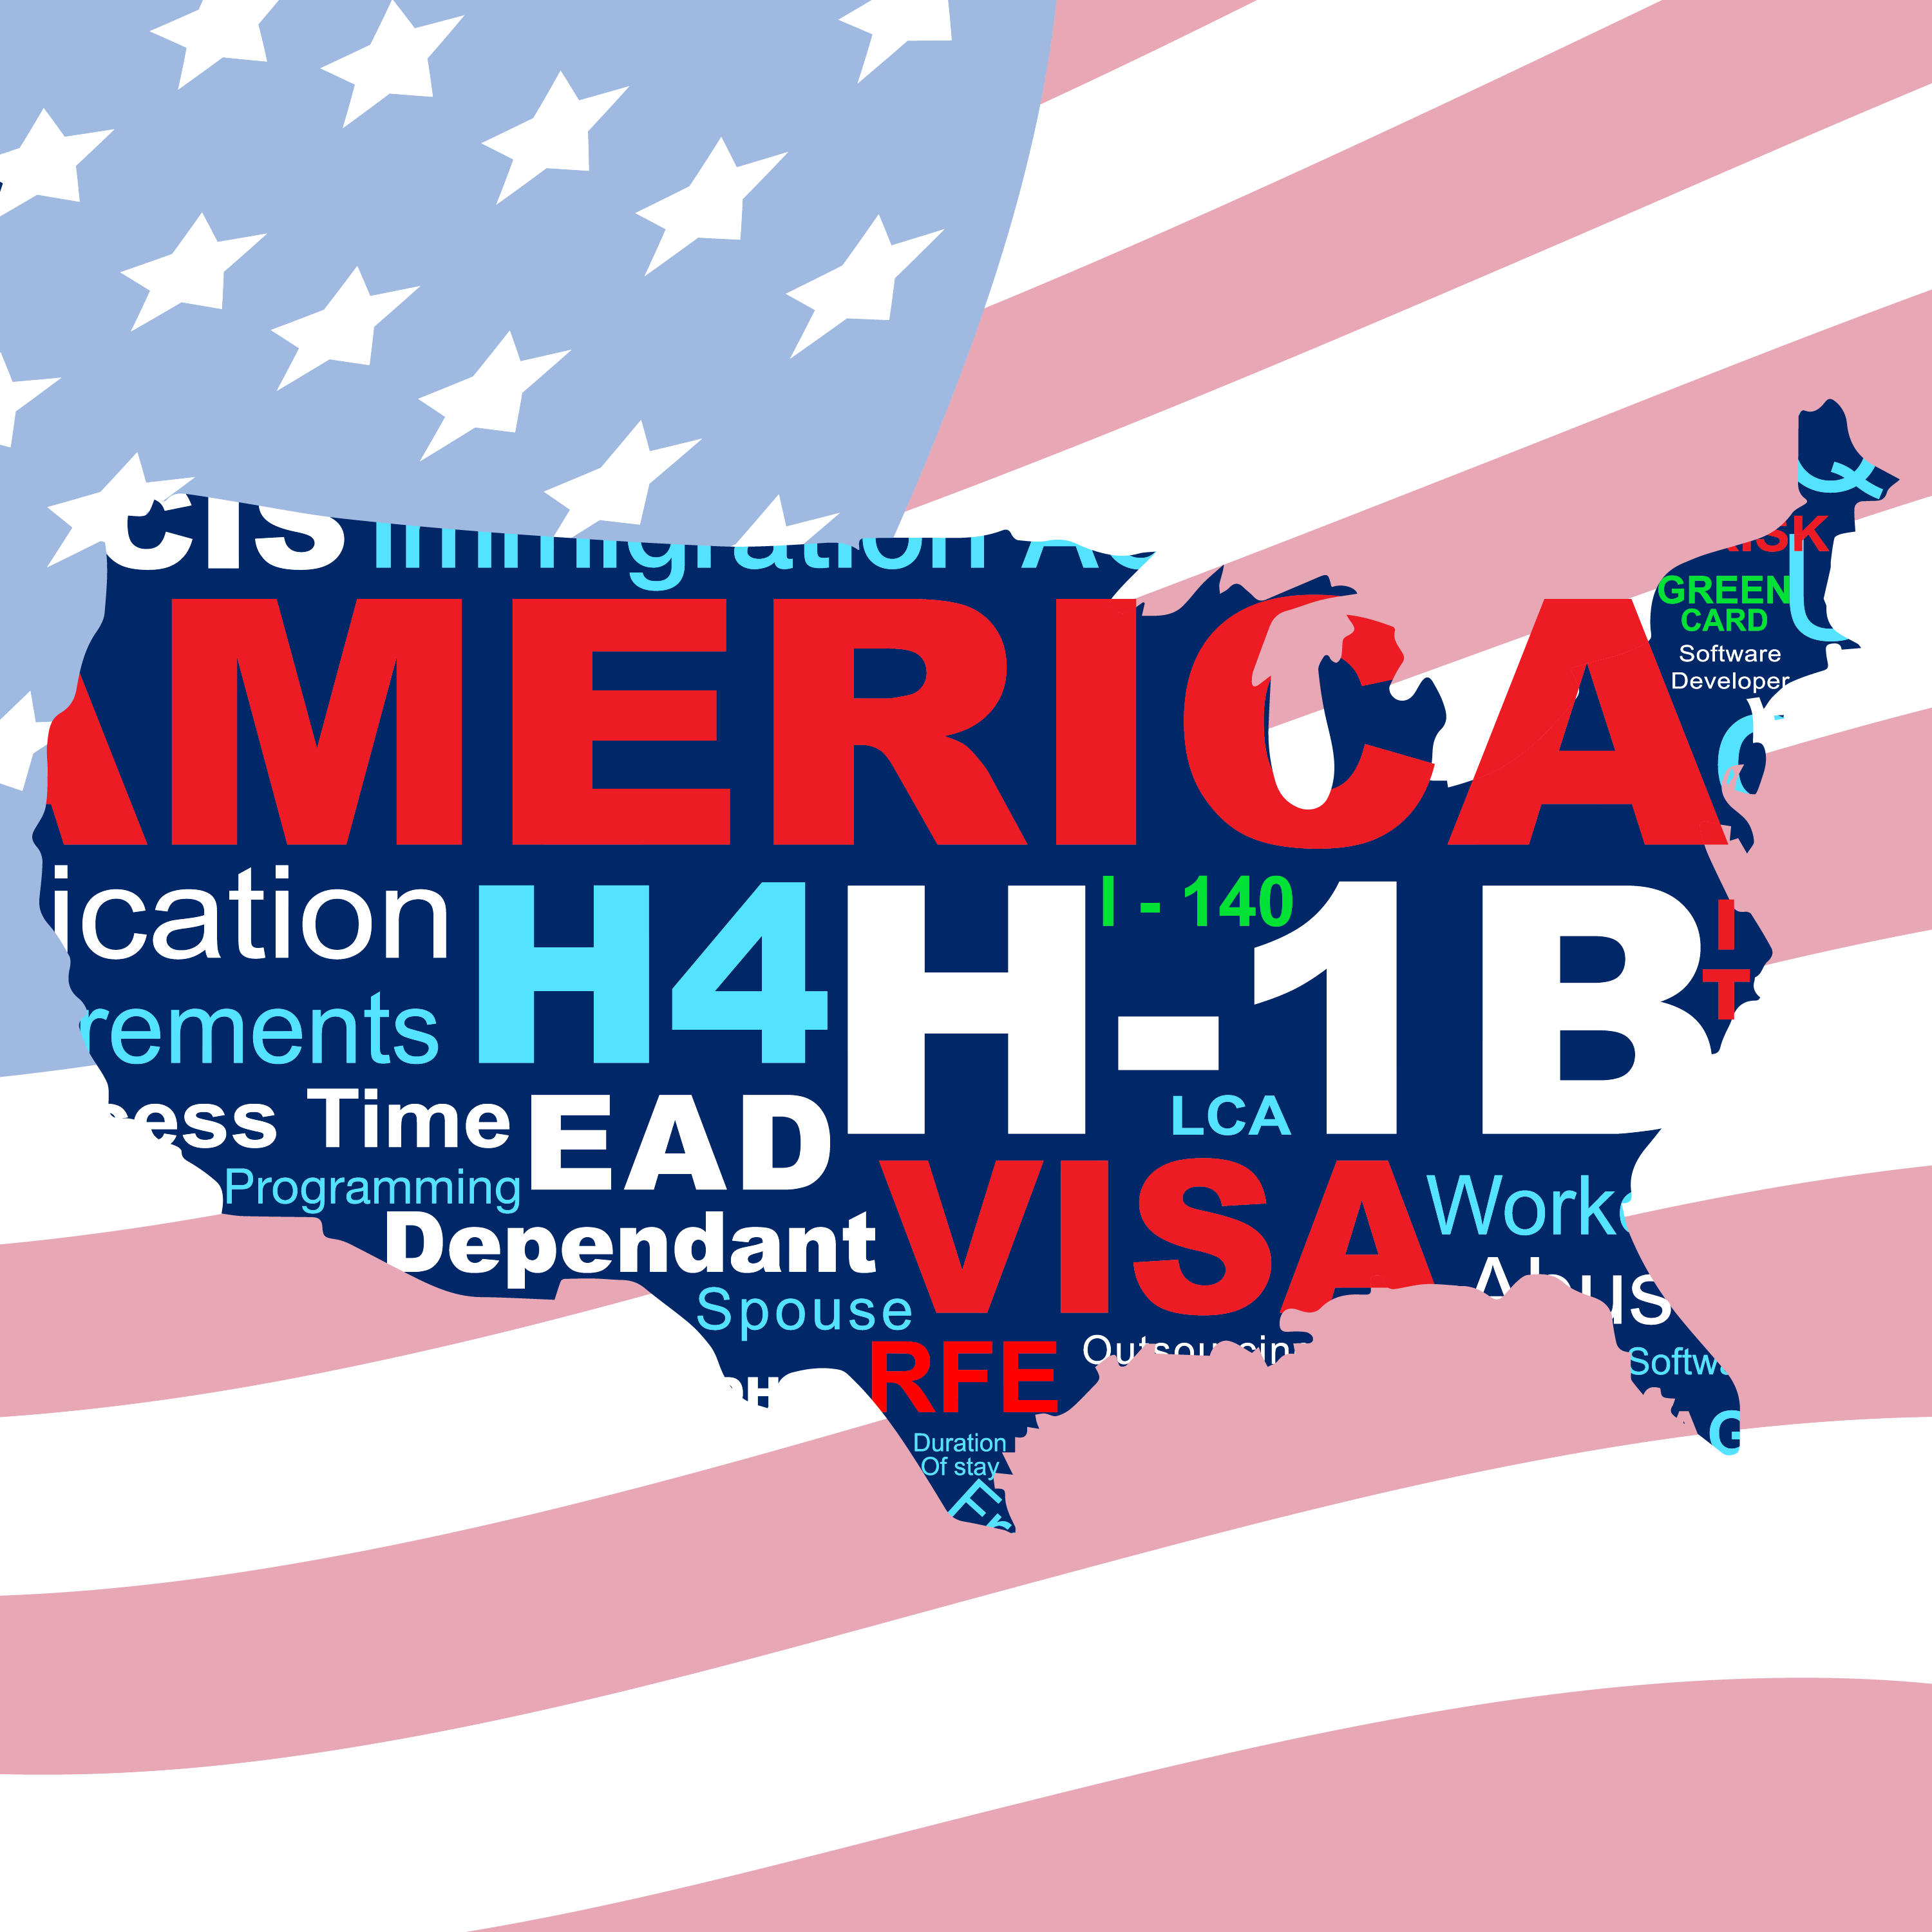 Identify H-1B Candidates by February 15, 2022 to Supplement Your Workforce with Qualified Professional Employees